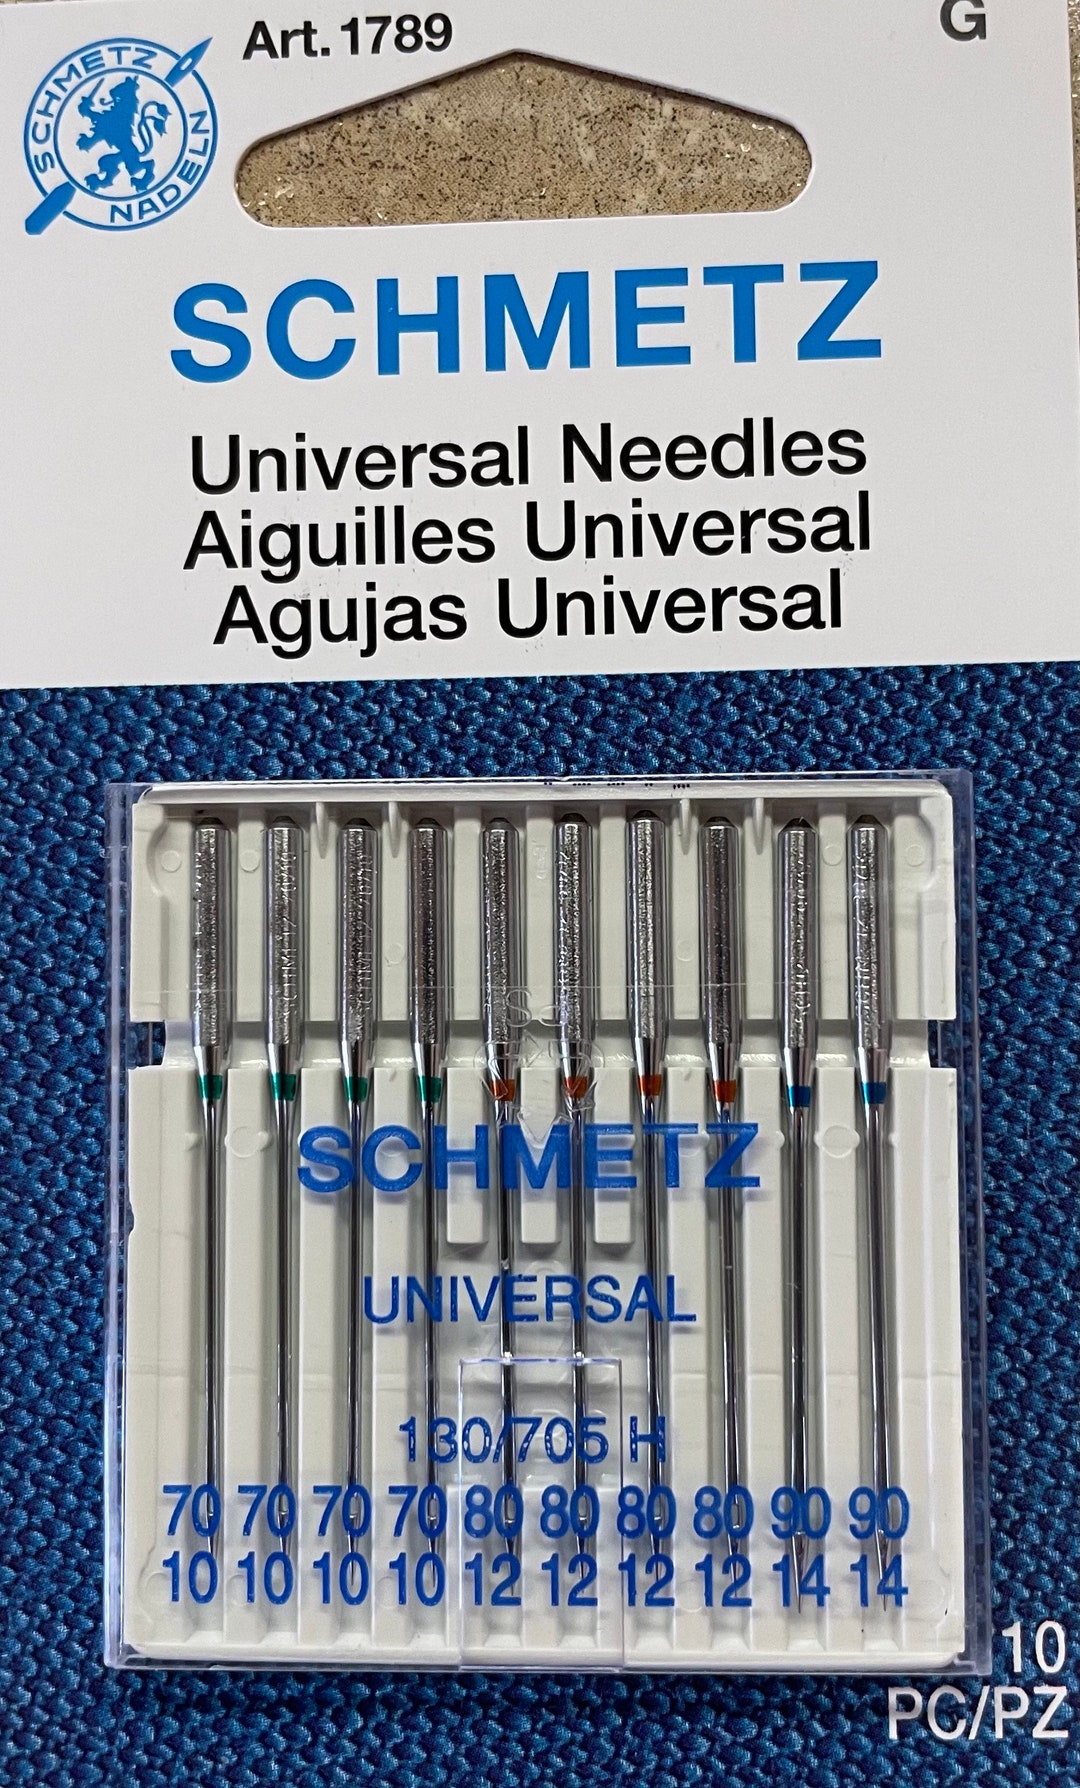 Schmetz Universal Needle Combo Pack of 10 For Sewing Machine Needle System  130/705H